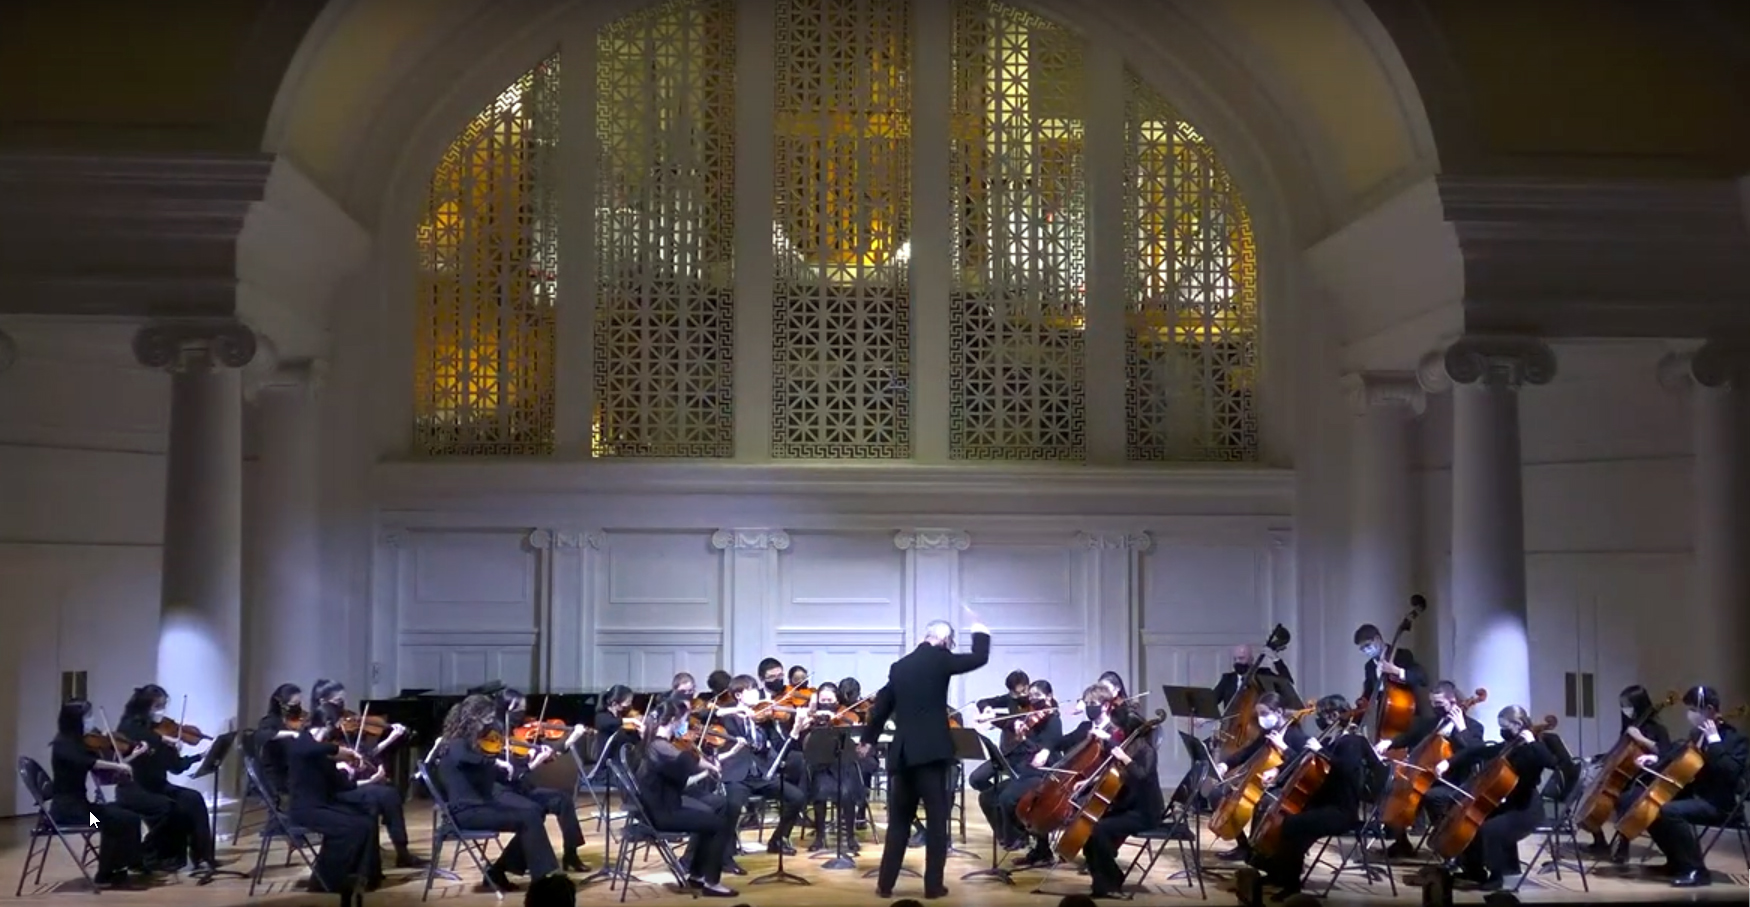 Music Institute's Academy Orchestra in concert on May 18